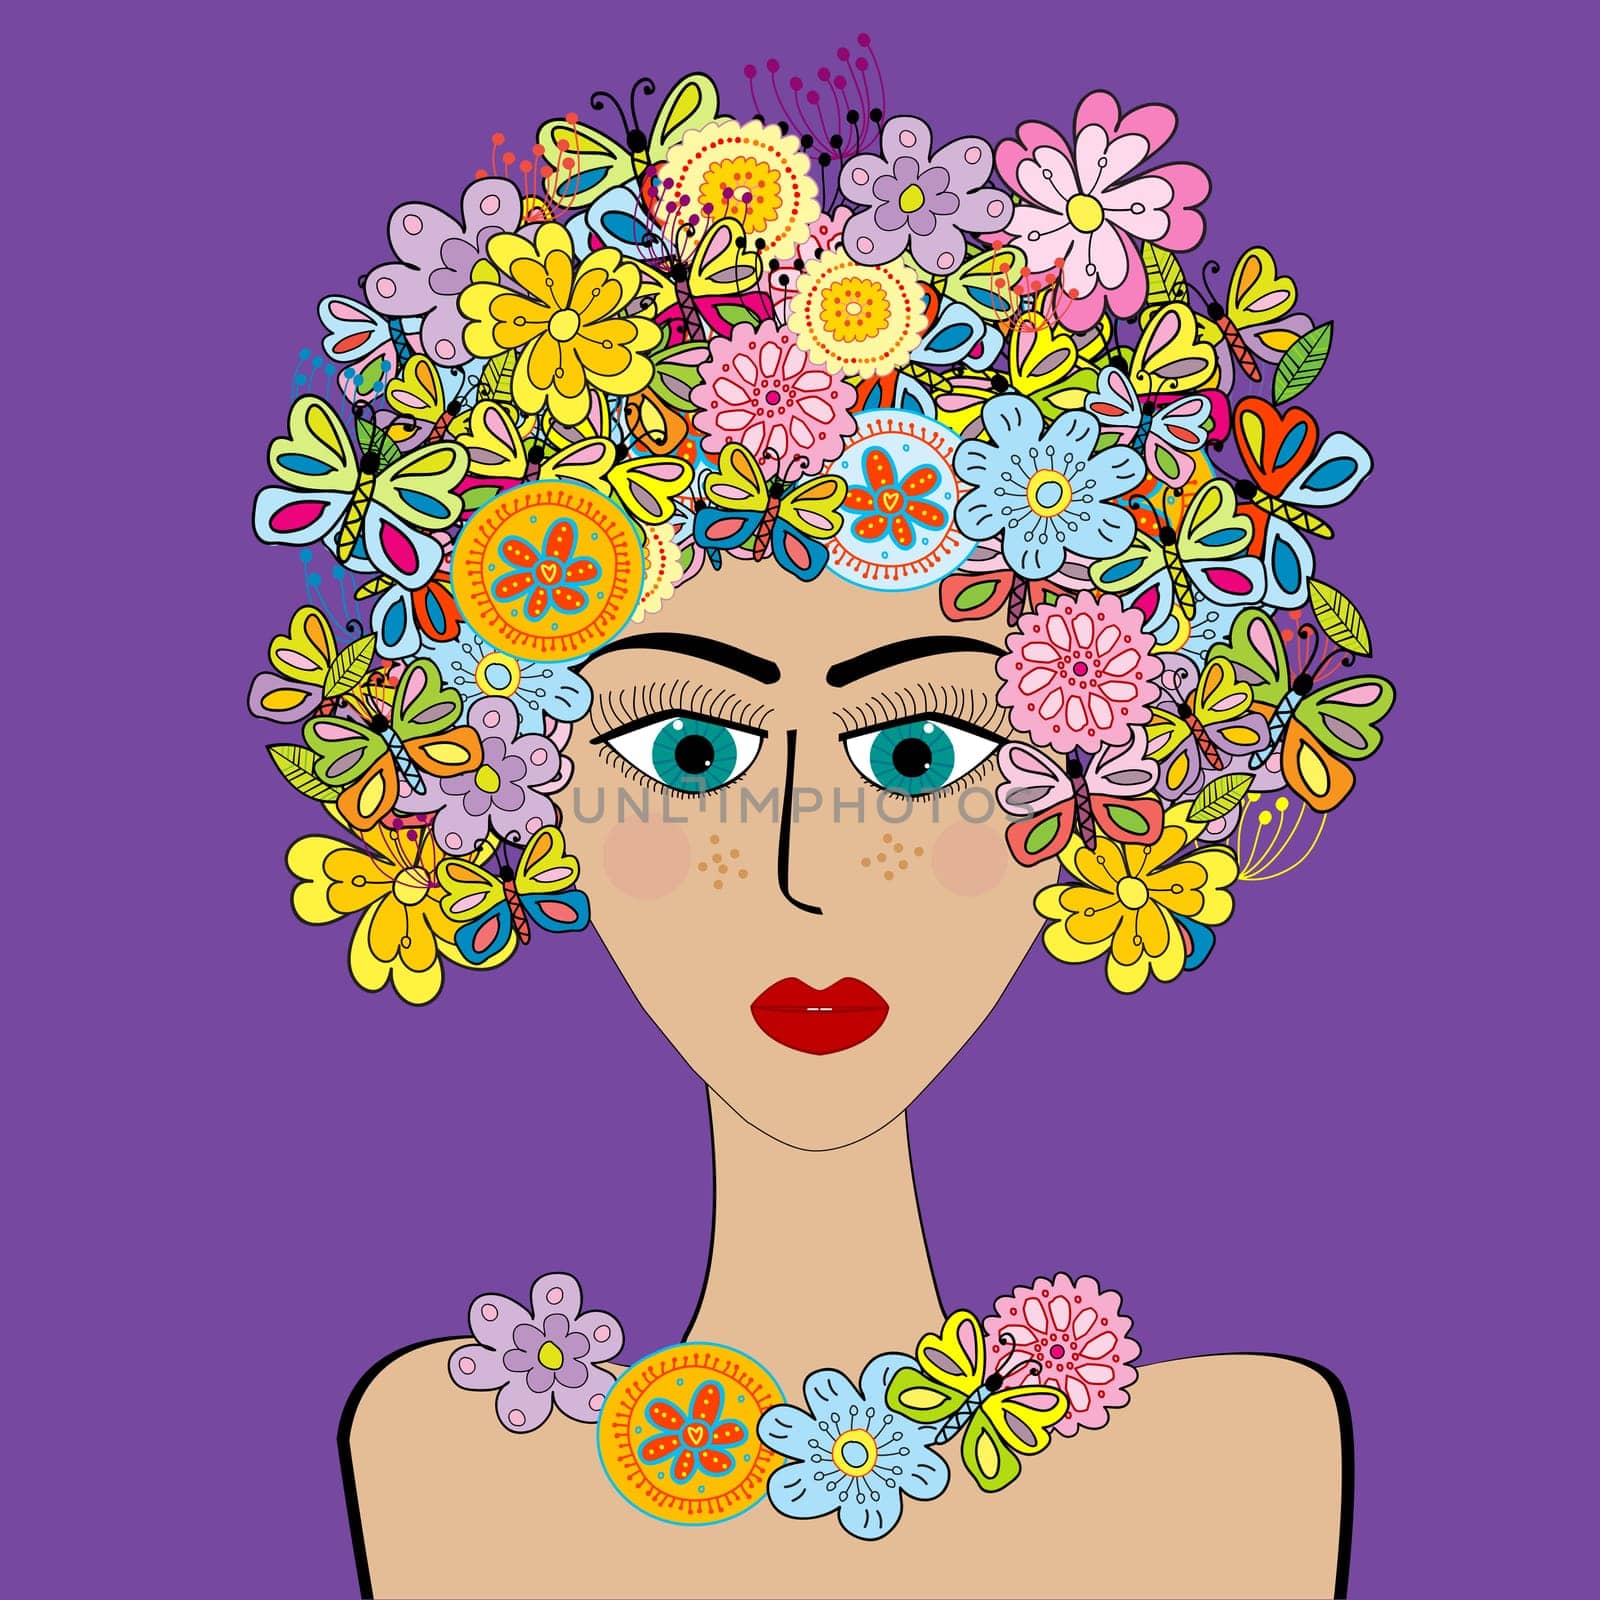 Hand drawing of a stylized woman with flowers and butterflies on her head